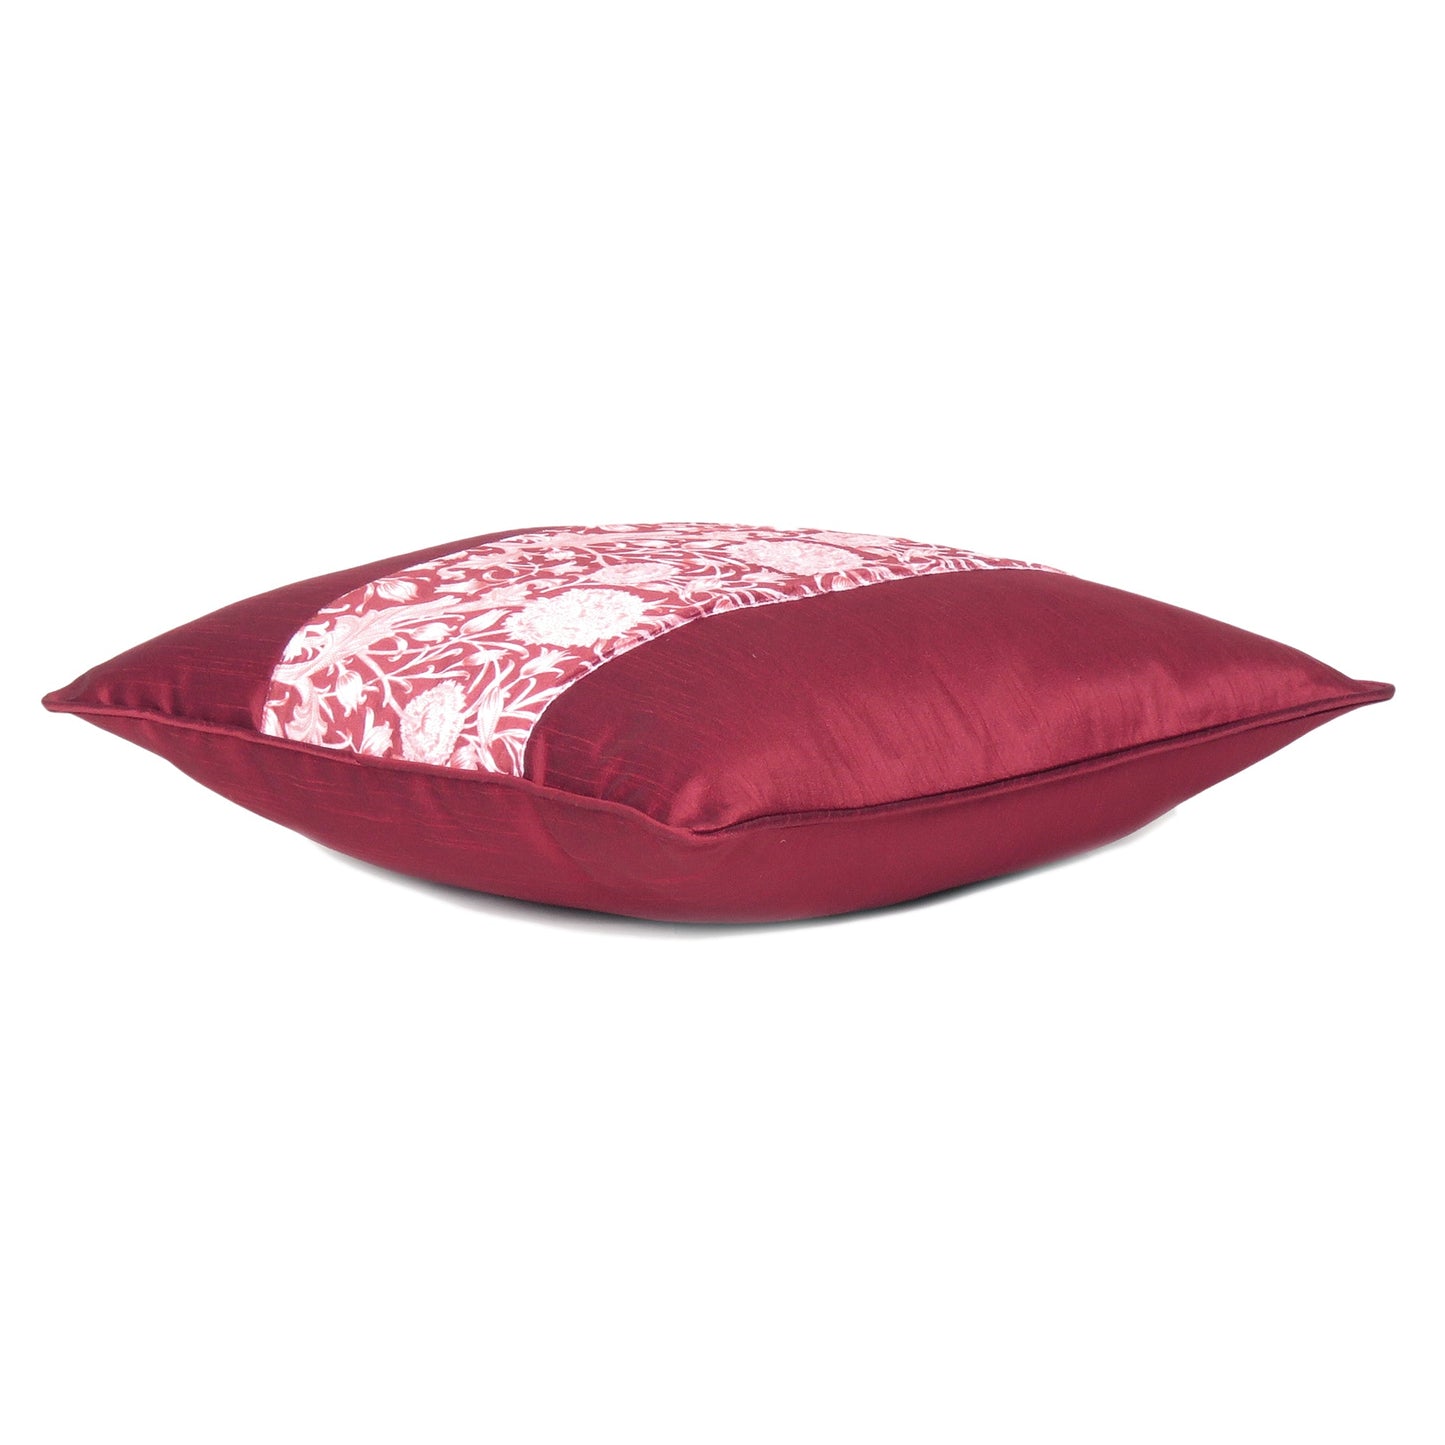 Velvet Polydupion Decorative Printed Cushion Cases in Set of 2 - Maroon